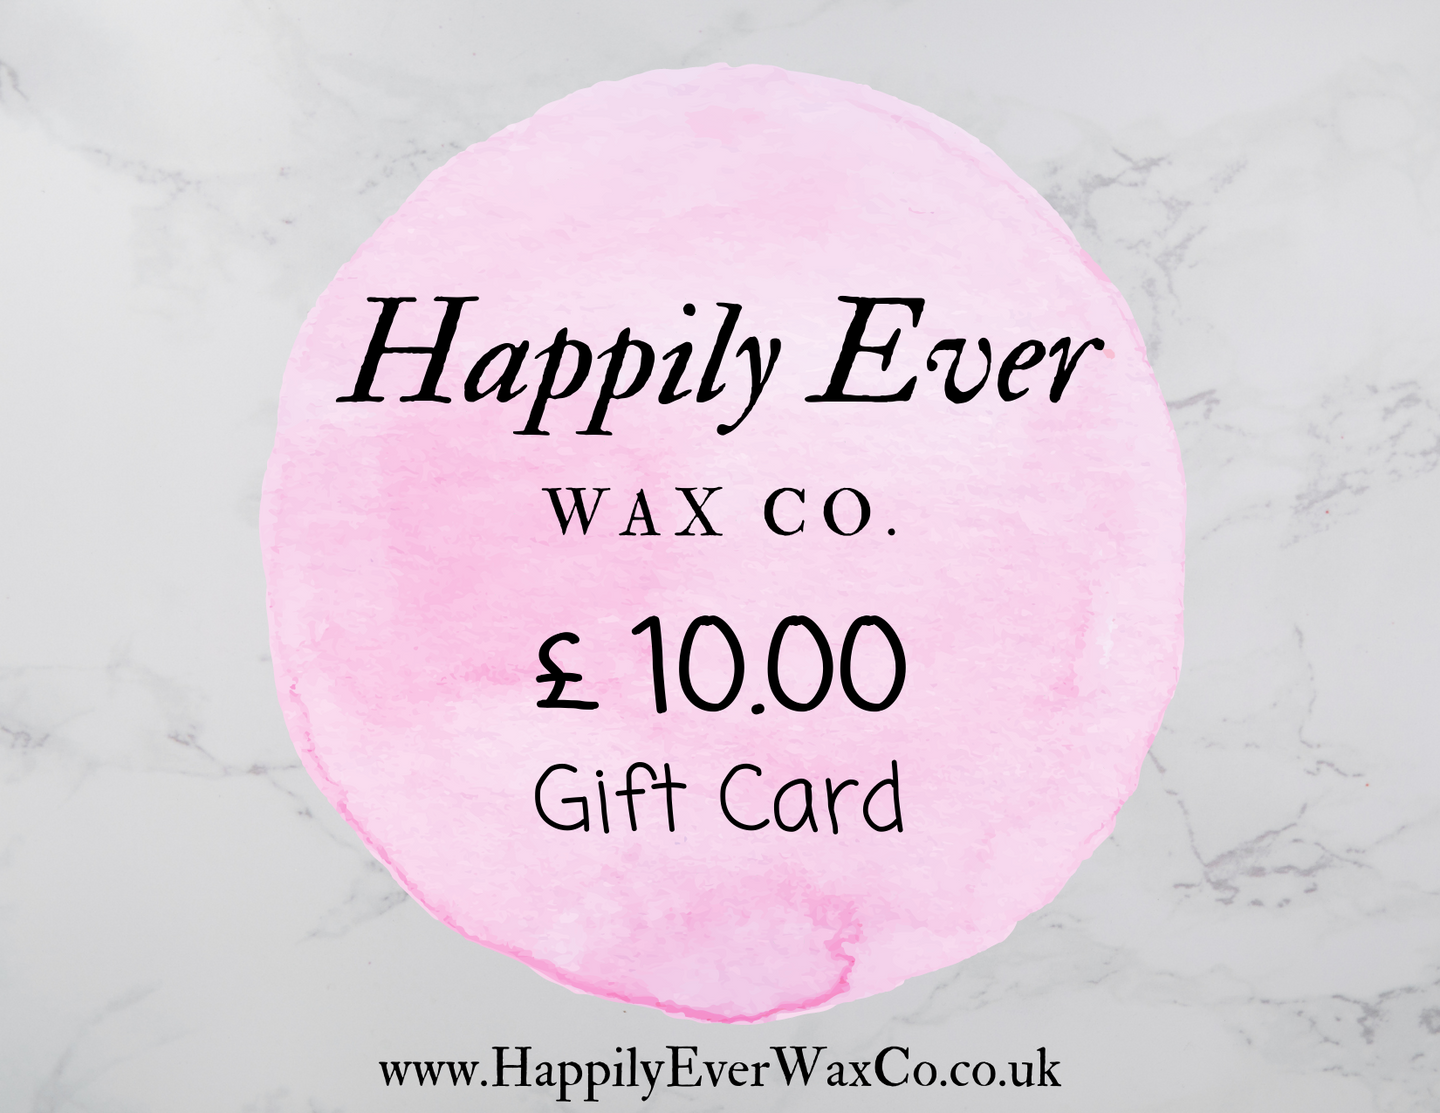 Happily Ever Wax Co Gift Cards!